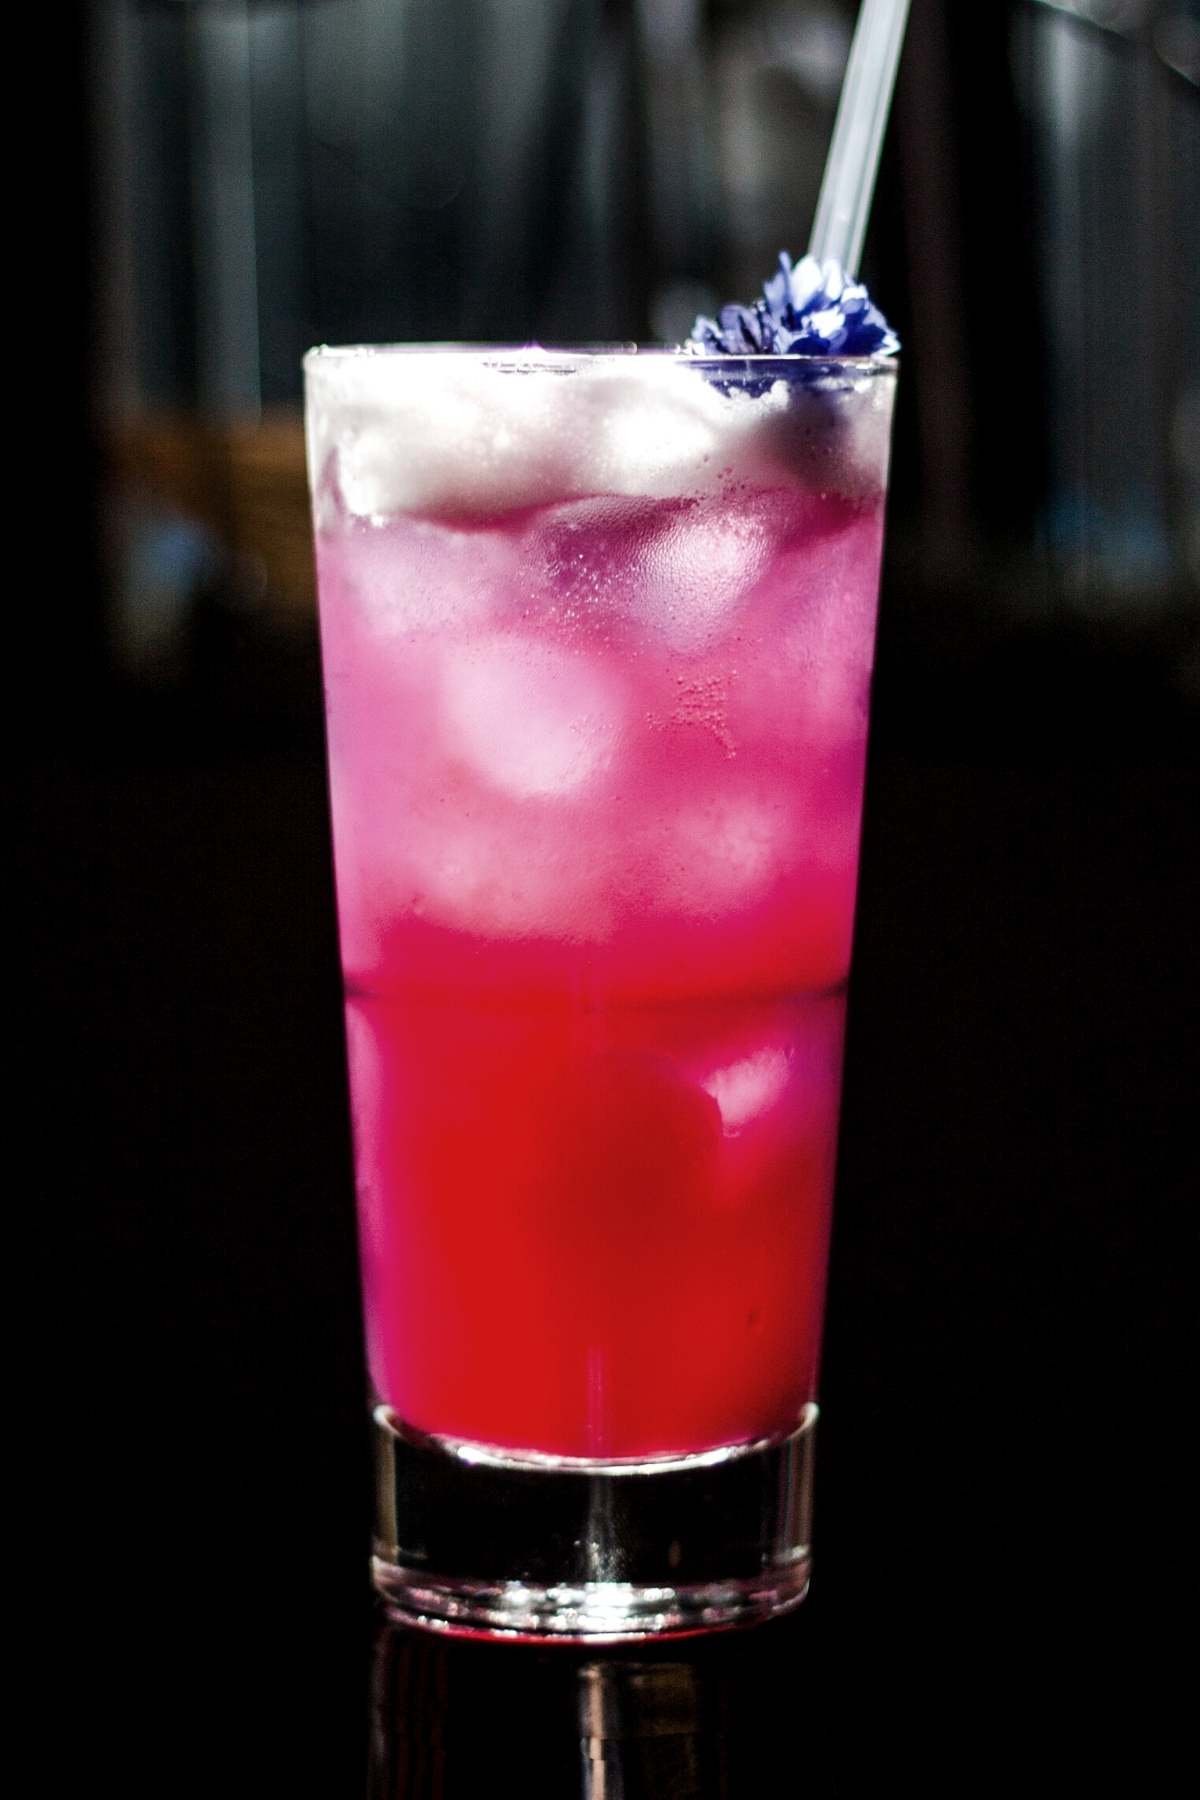 Add this Purple Passion cocktail to the bar menu at your next party! It’s a delicious combination of grapefruit juice, cranberry juice, vodka, and grenadine.